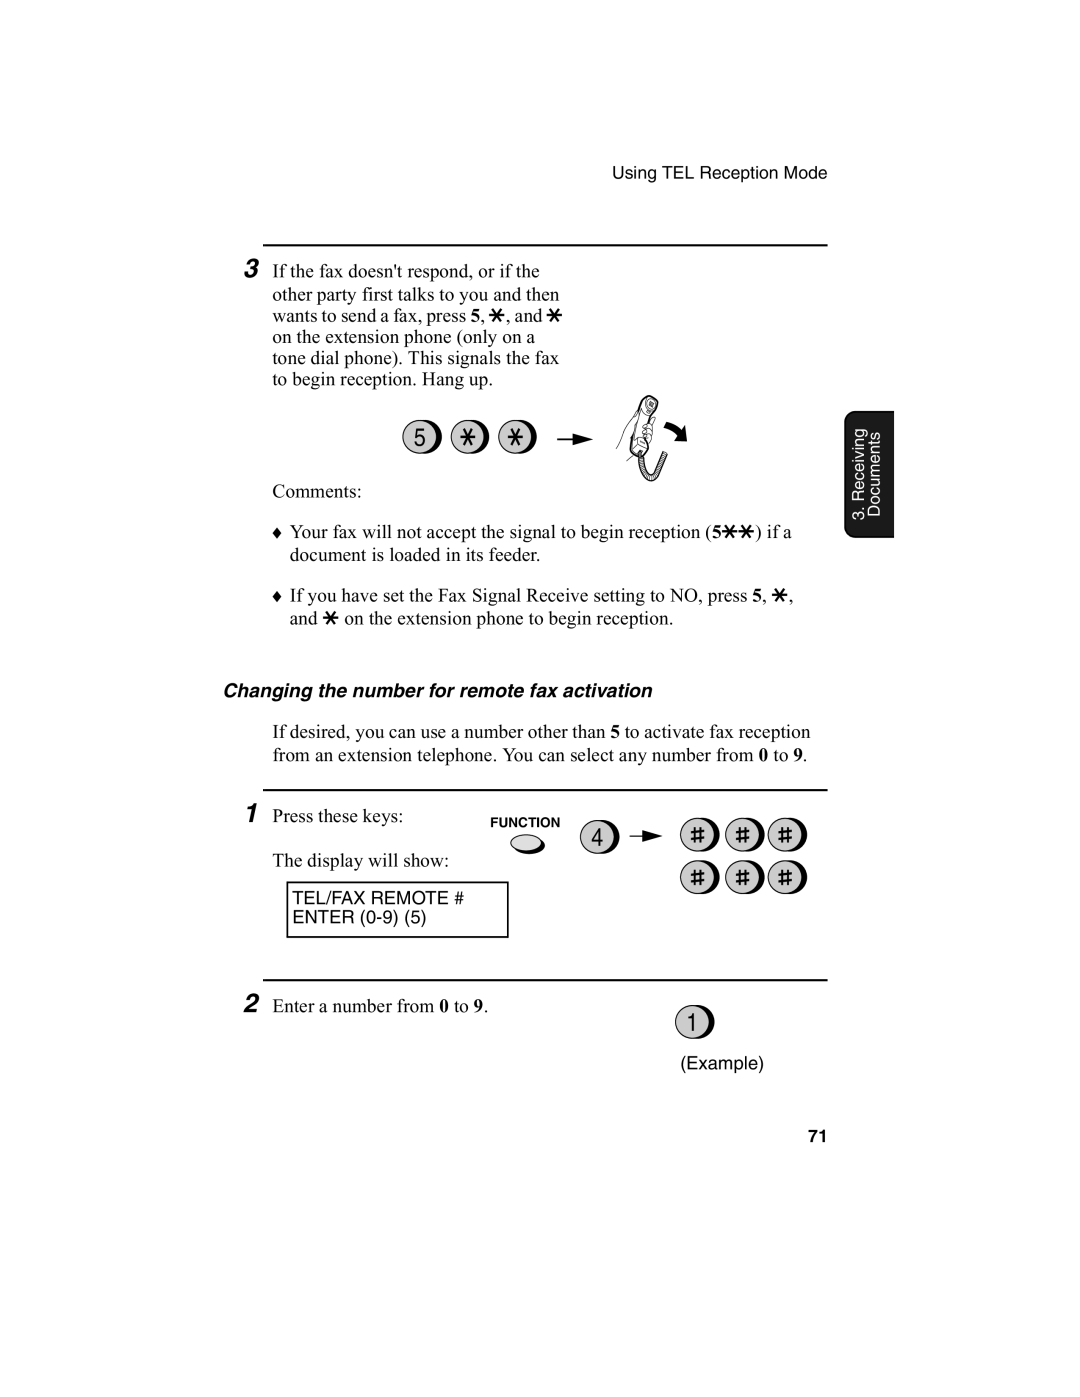 Sharp FO-2970M operation manual Changing the number for remote fax activation, Press these keys 